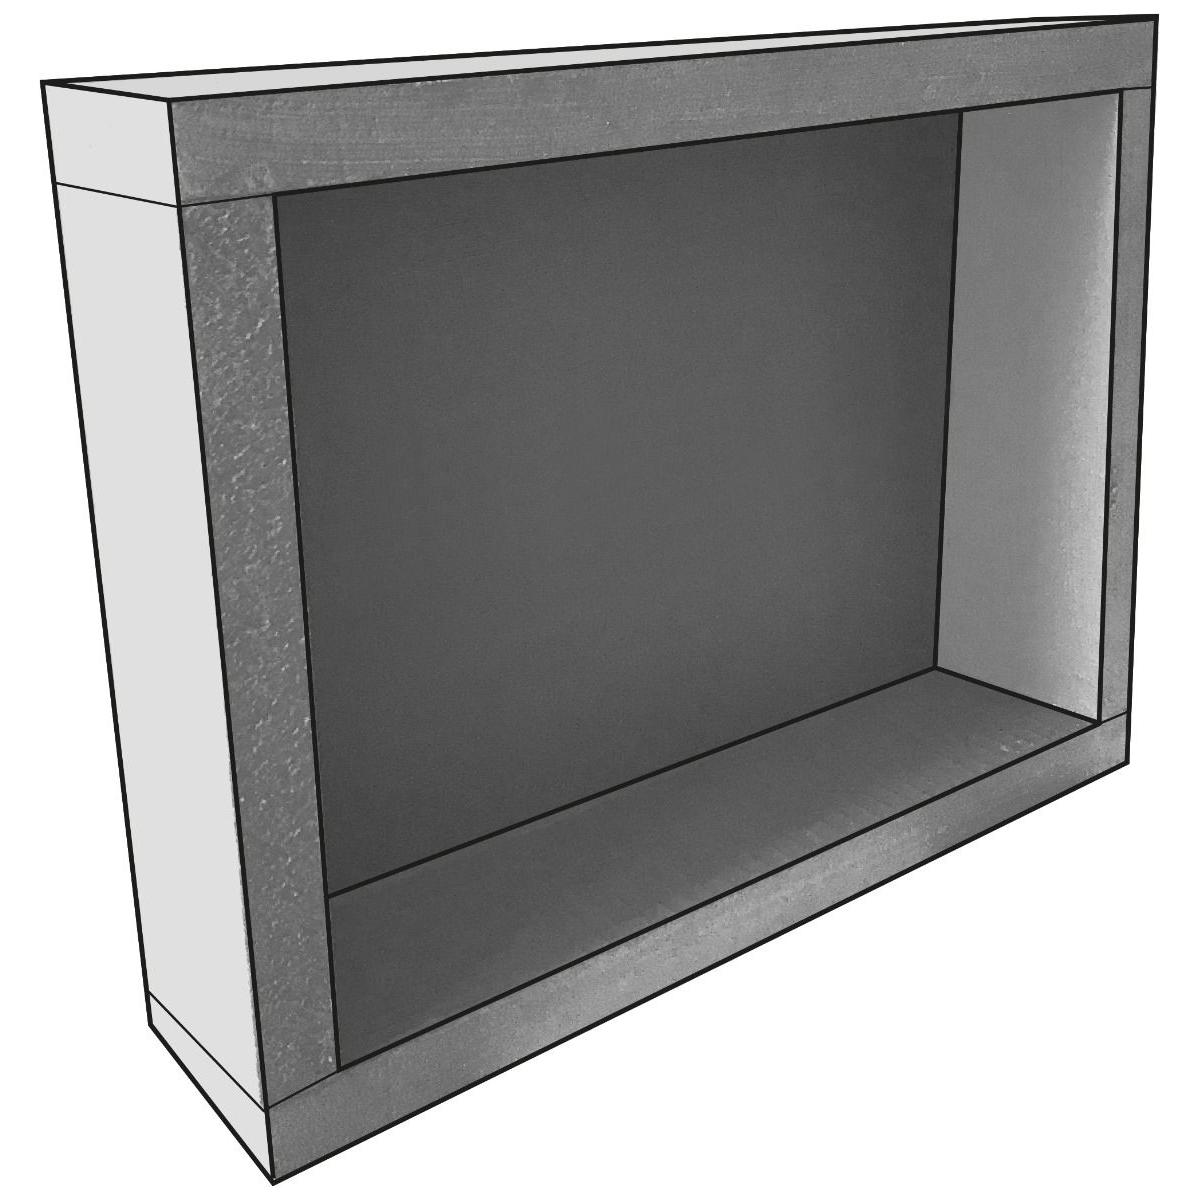 Wetroom Wall Niche Shelving Unit - 350 x 450 x 100mm - Interiors Home Stores